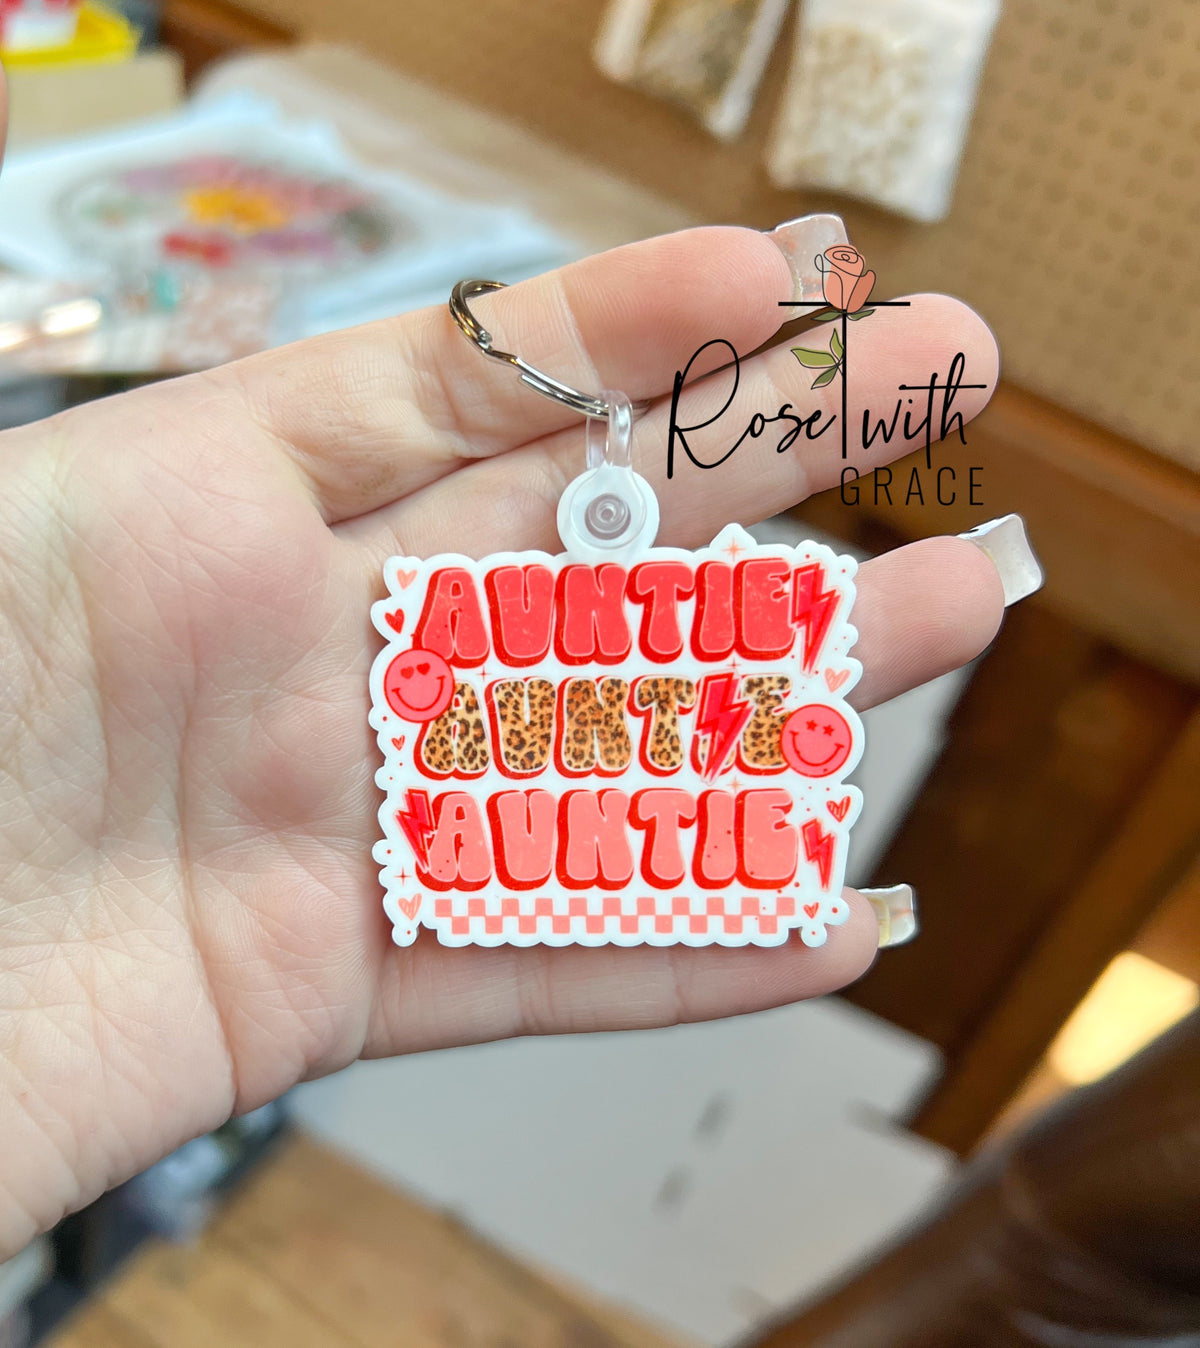 Auntie & Fur Mama Acrylic Keychains Rose with Grace LLC